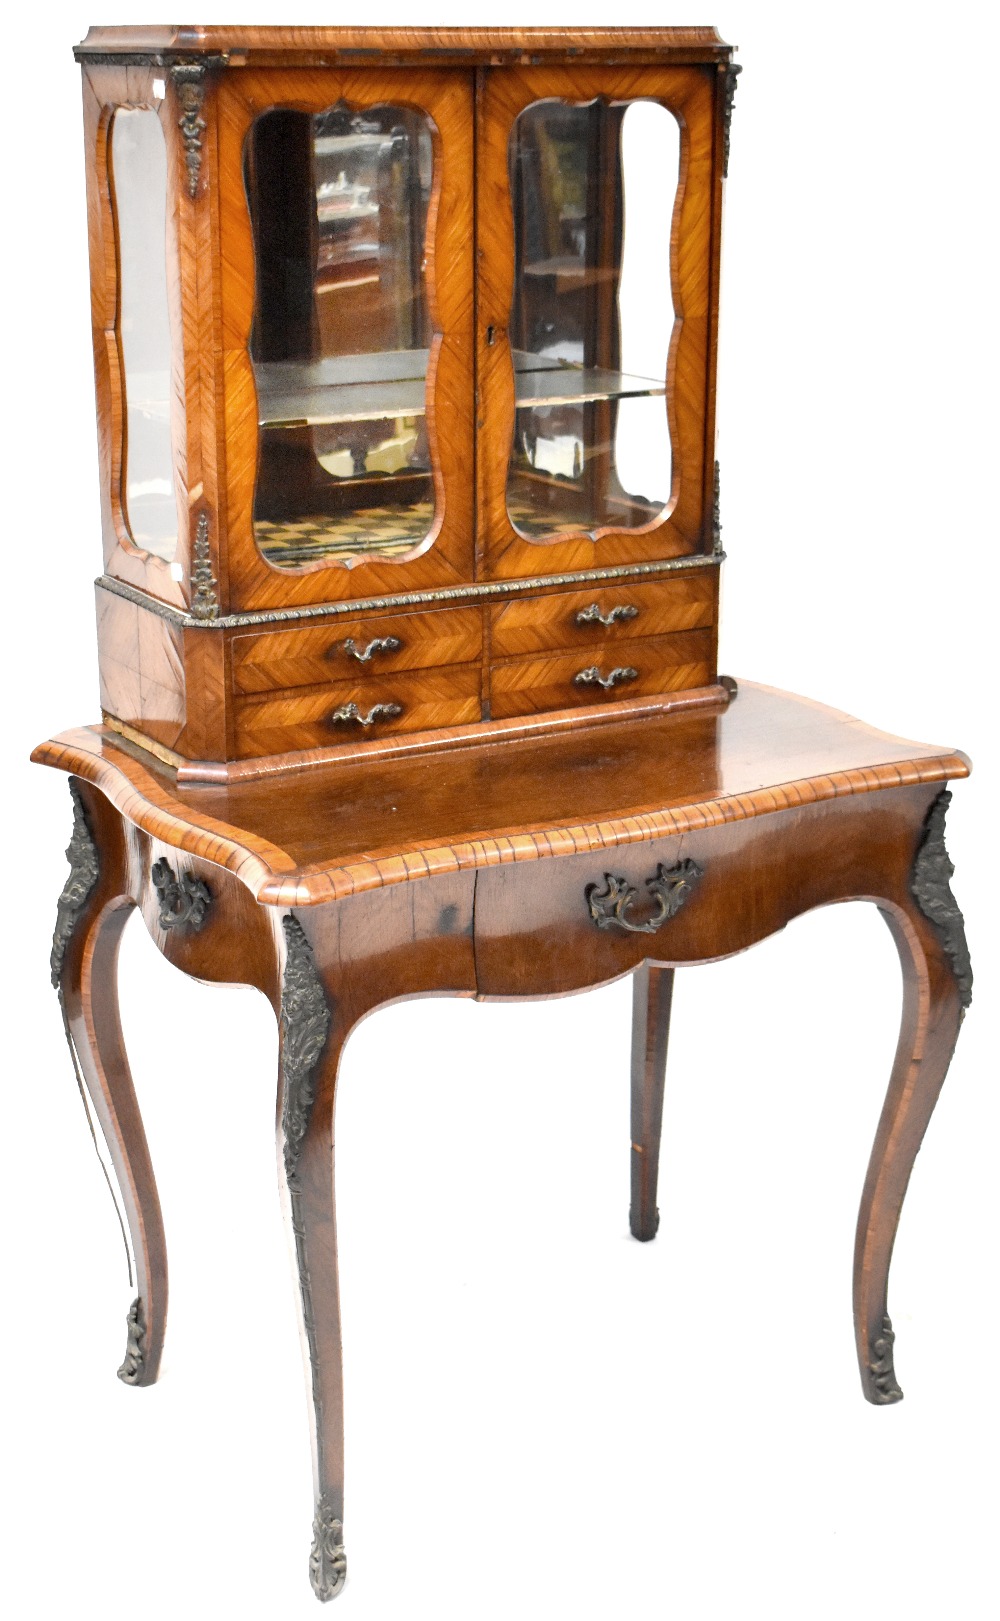 A 19th century flame mahogany bonheur du jour twin glazed display cabinet with glazed panels to